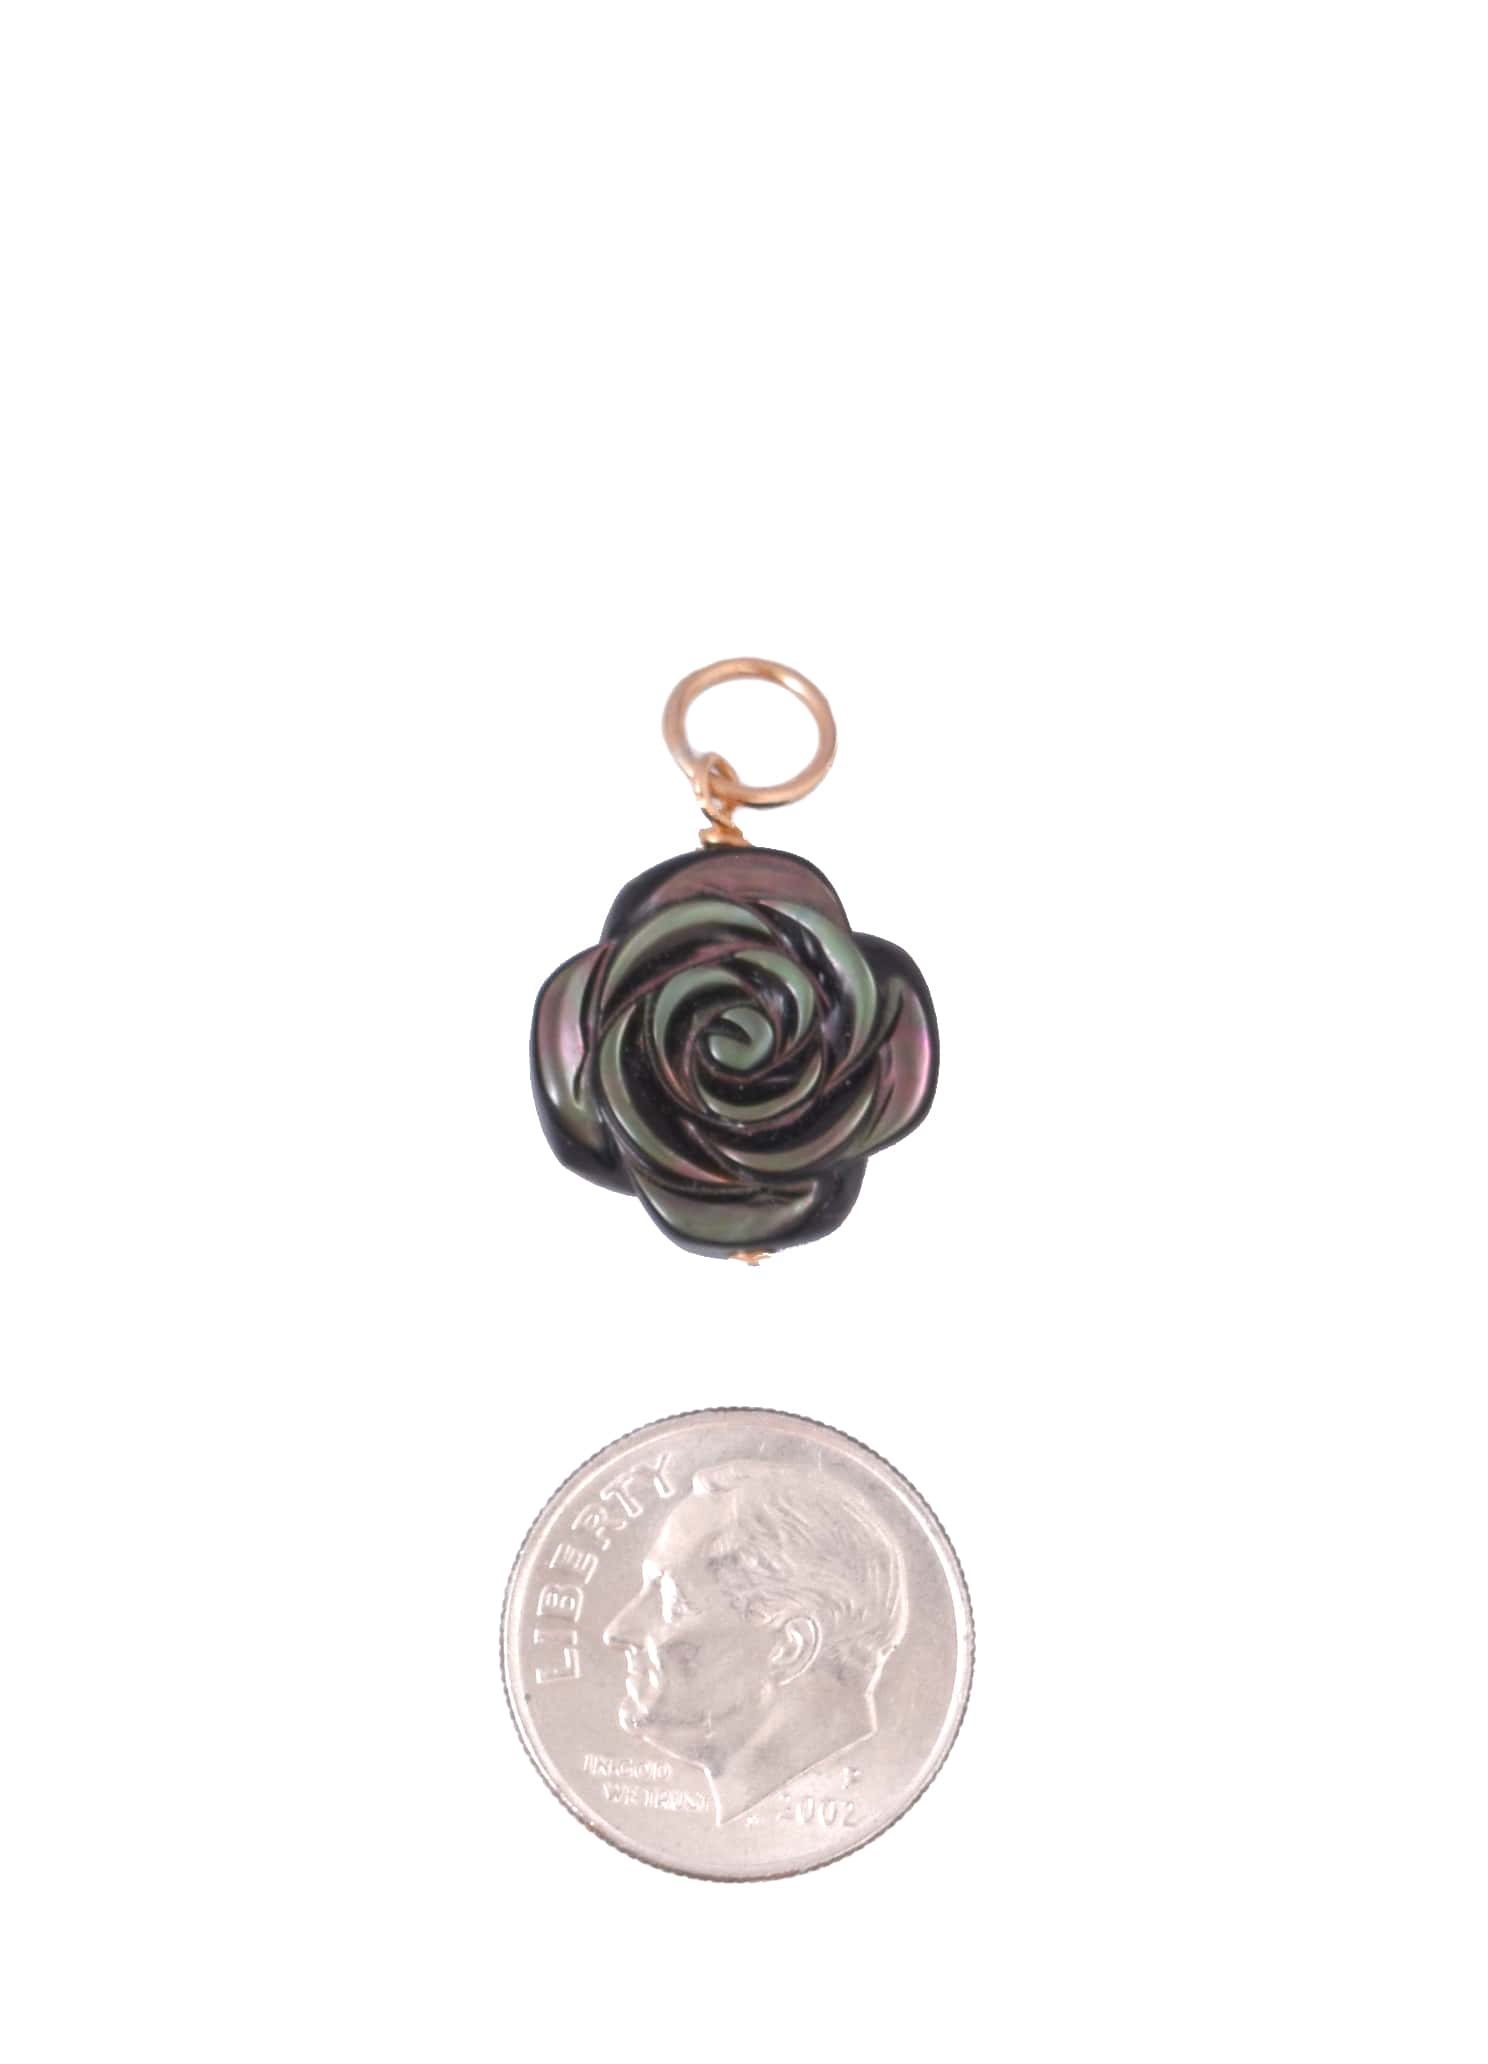 Carved Rose Charm in Black Mother of Pearl